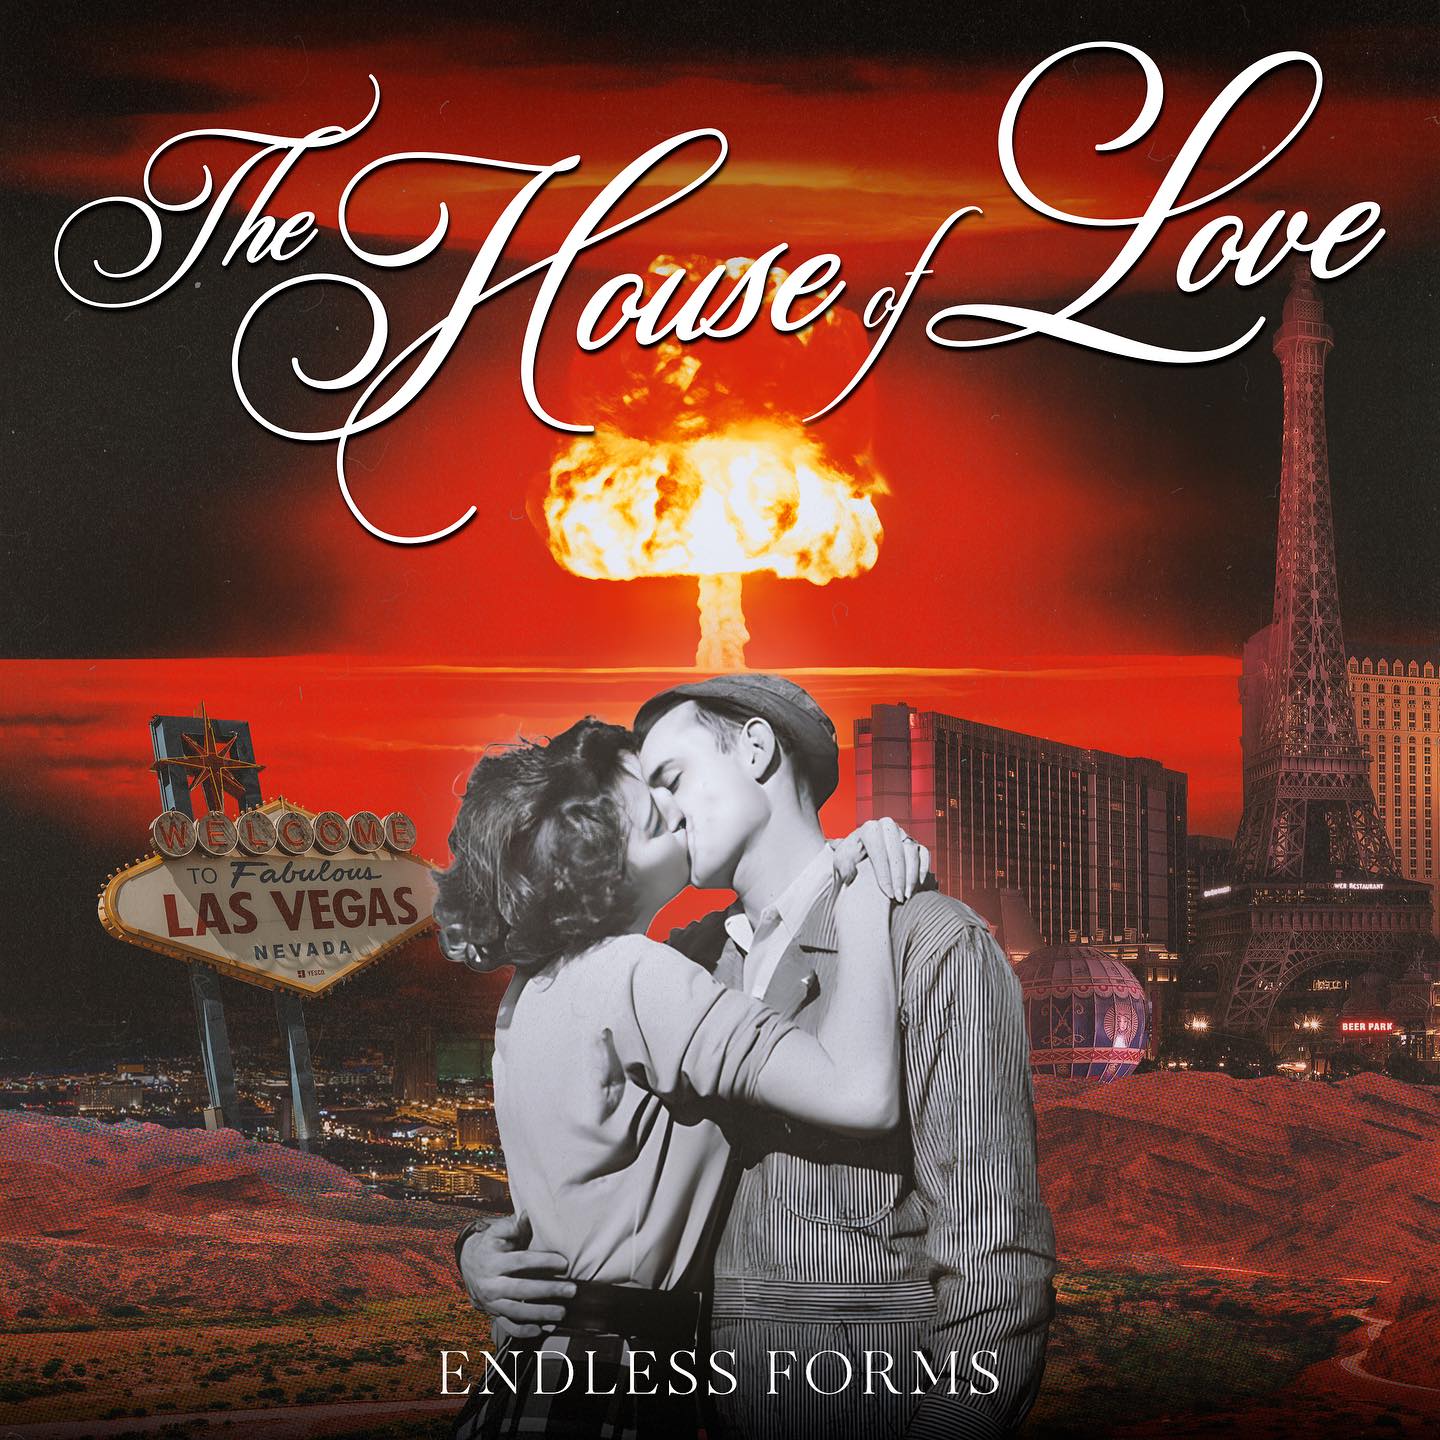 Endless Forms ‘The House of Love’ album artwork